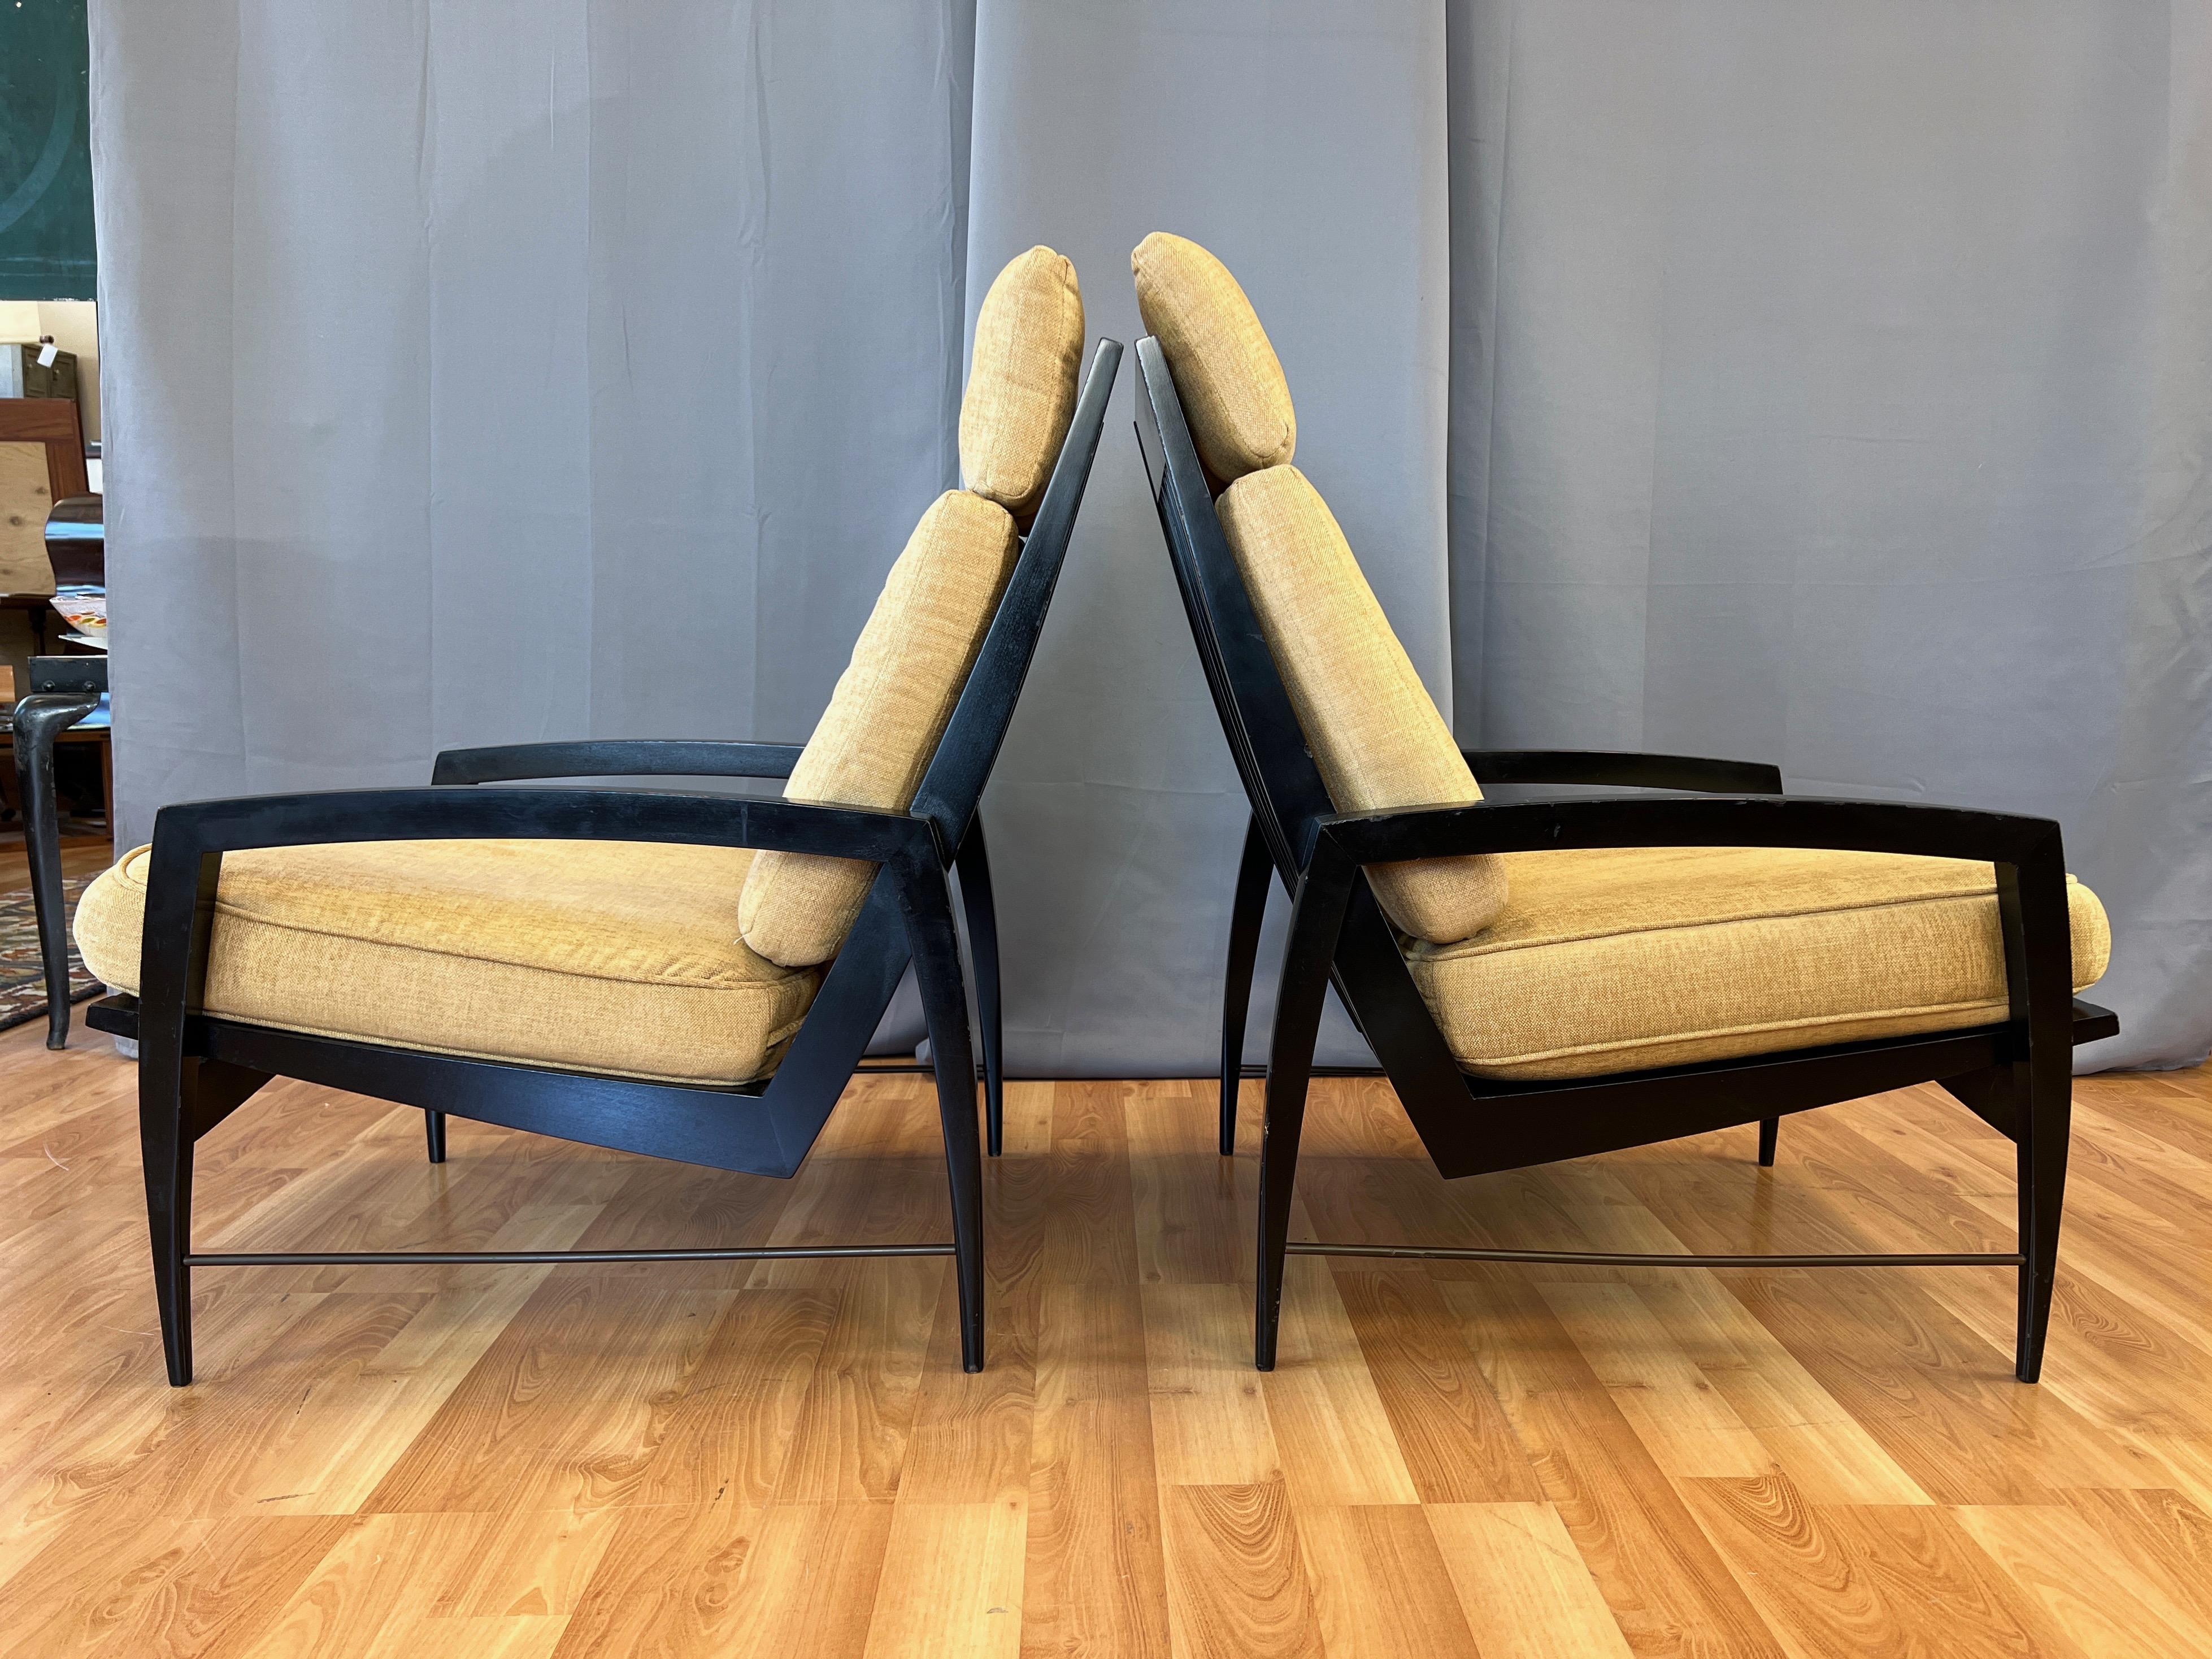 Pair of Dan Johnson for Selig Black Lacquered High-Back Lounge Chairs, 1950s For Sale 1